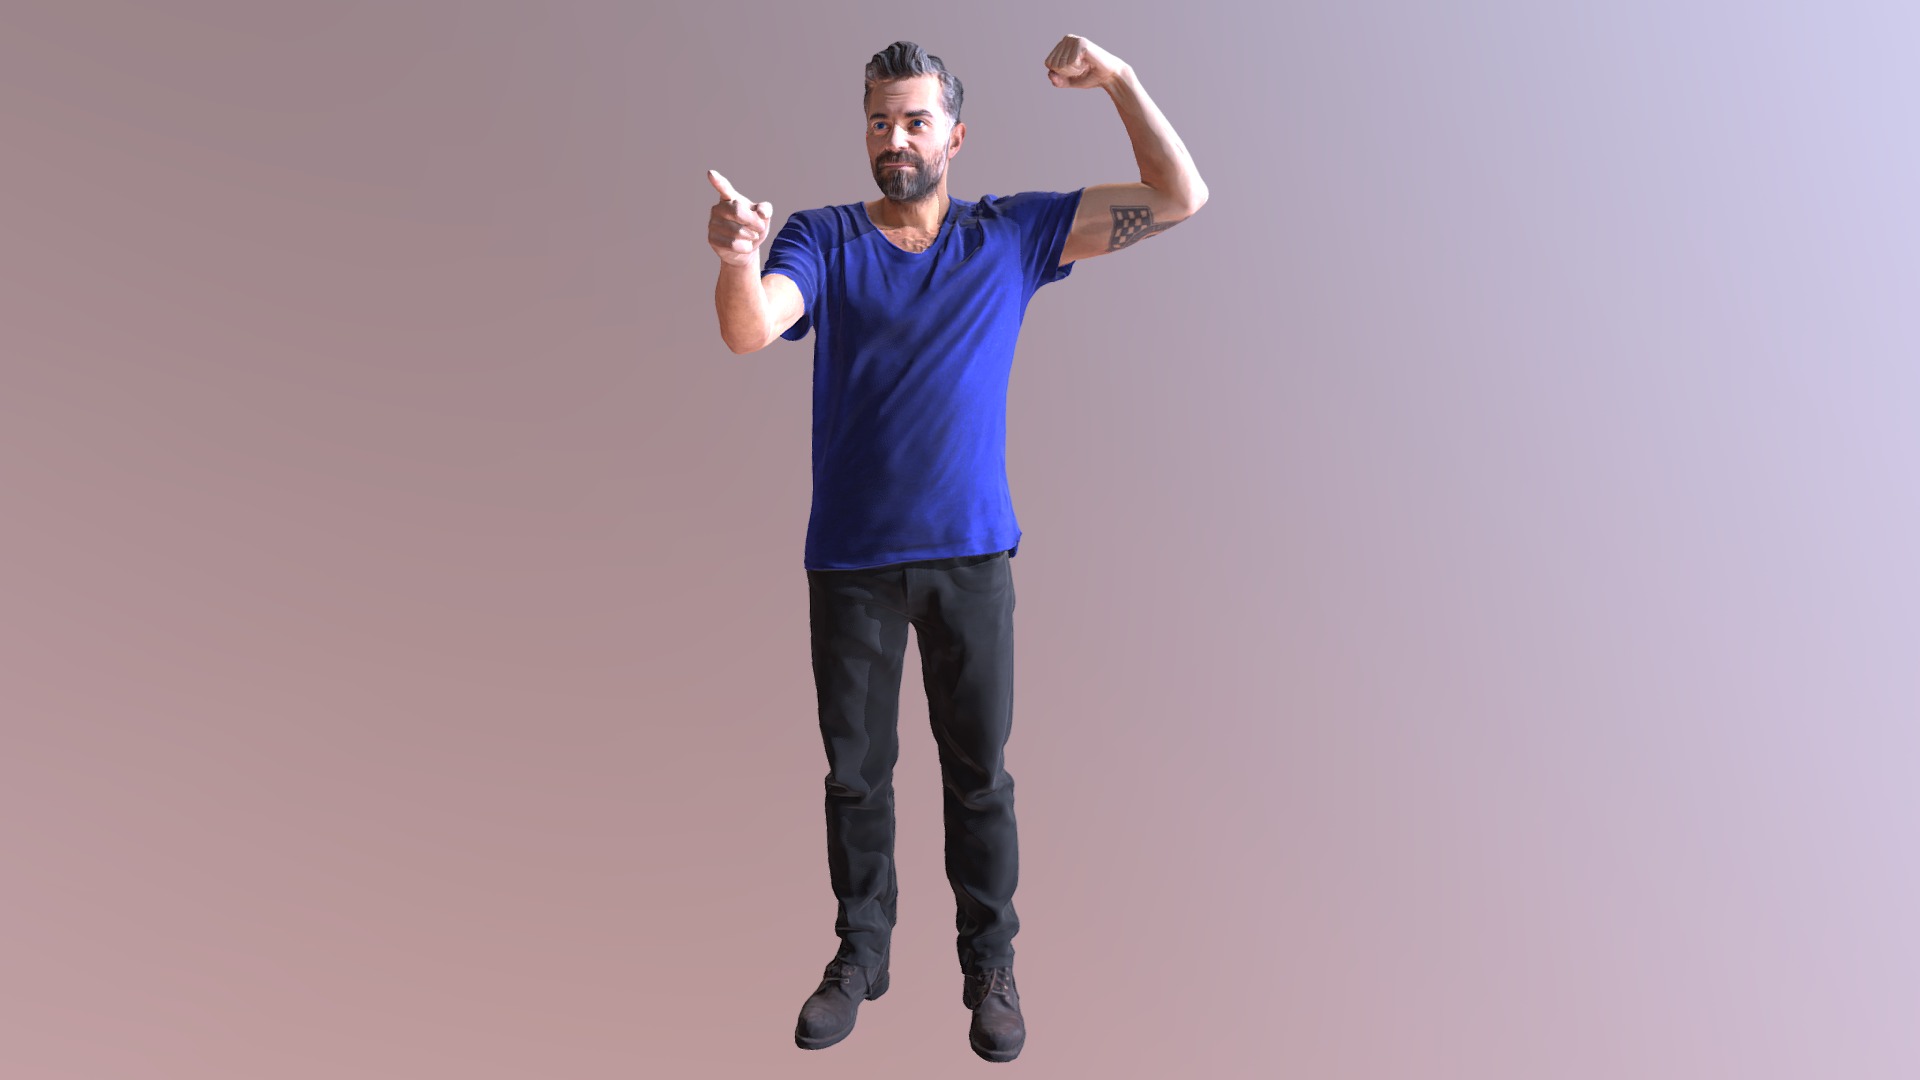 3D model No26 – Cool Guy - This is a 3D model of the No26 - Cool Guy. The 3D model is about a man with his arms raised.